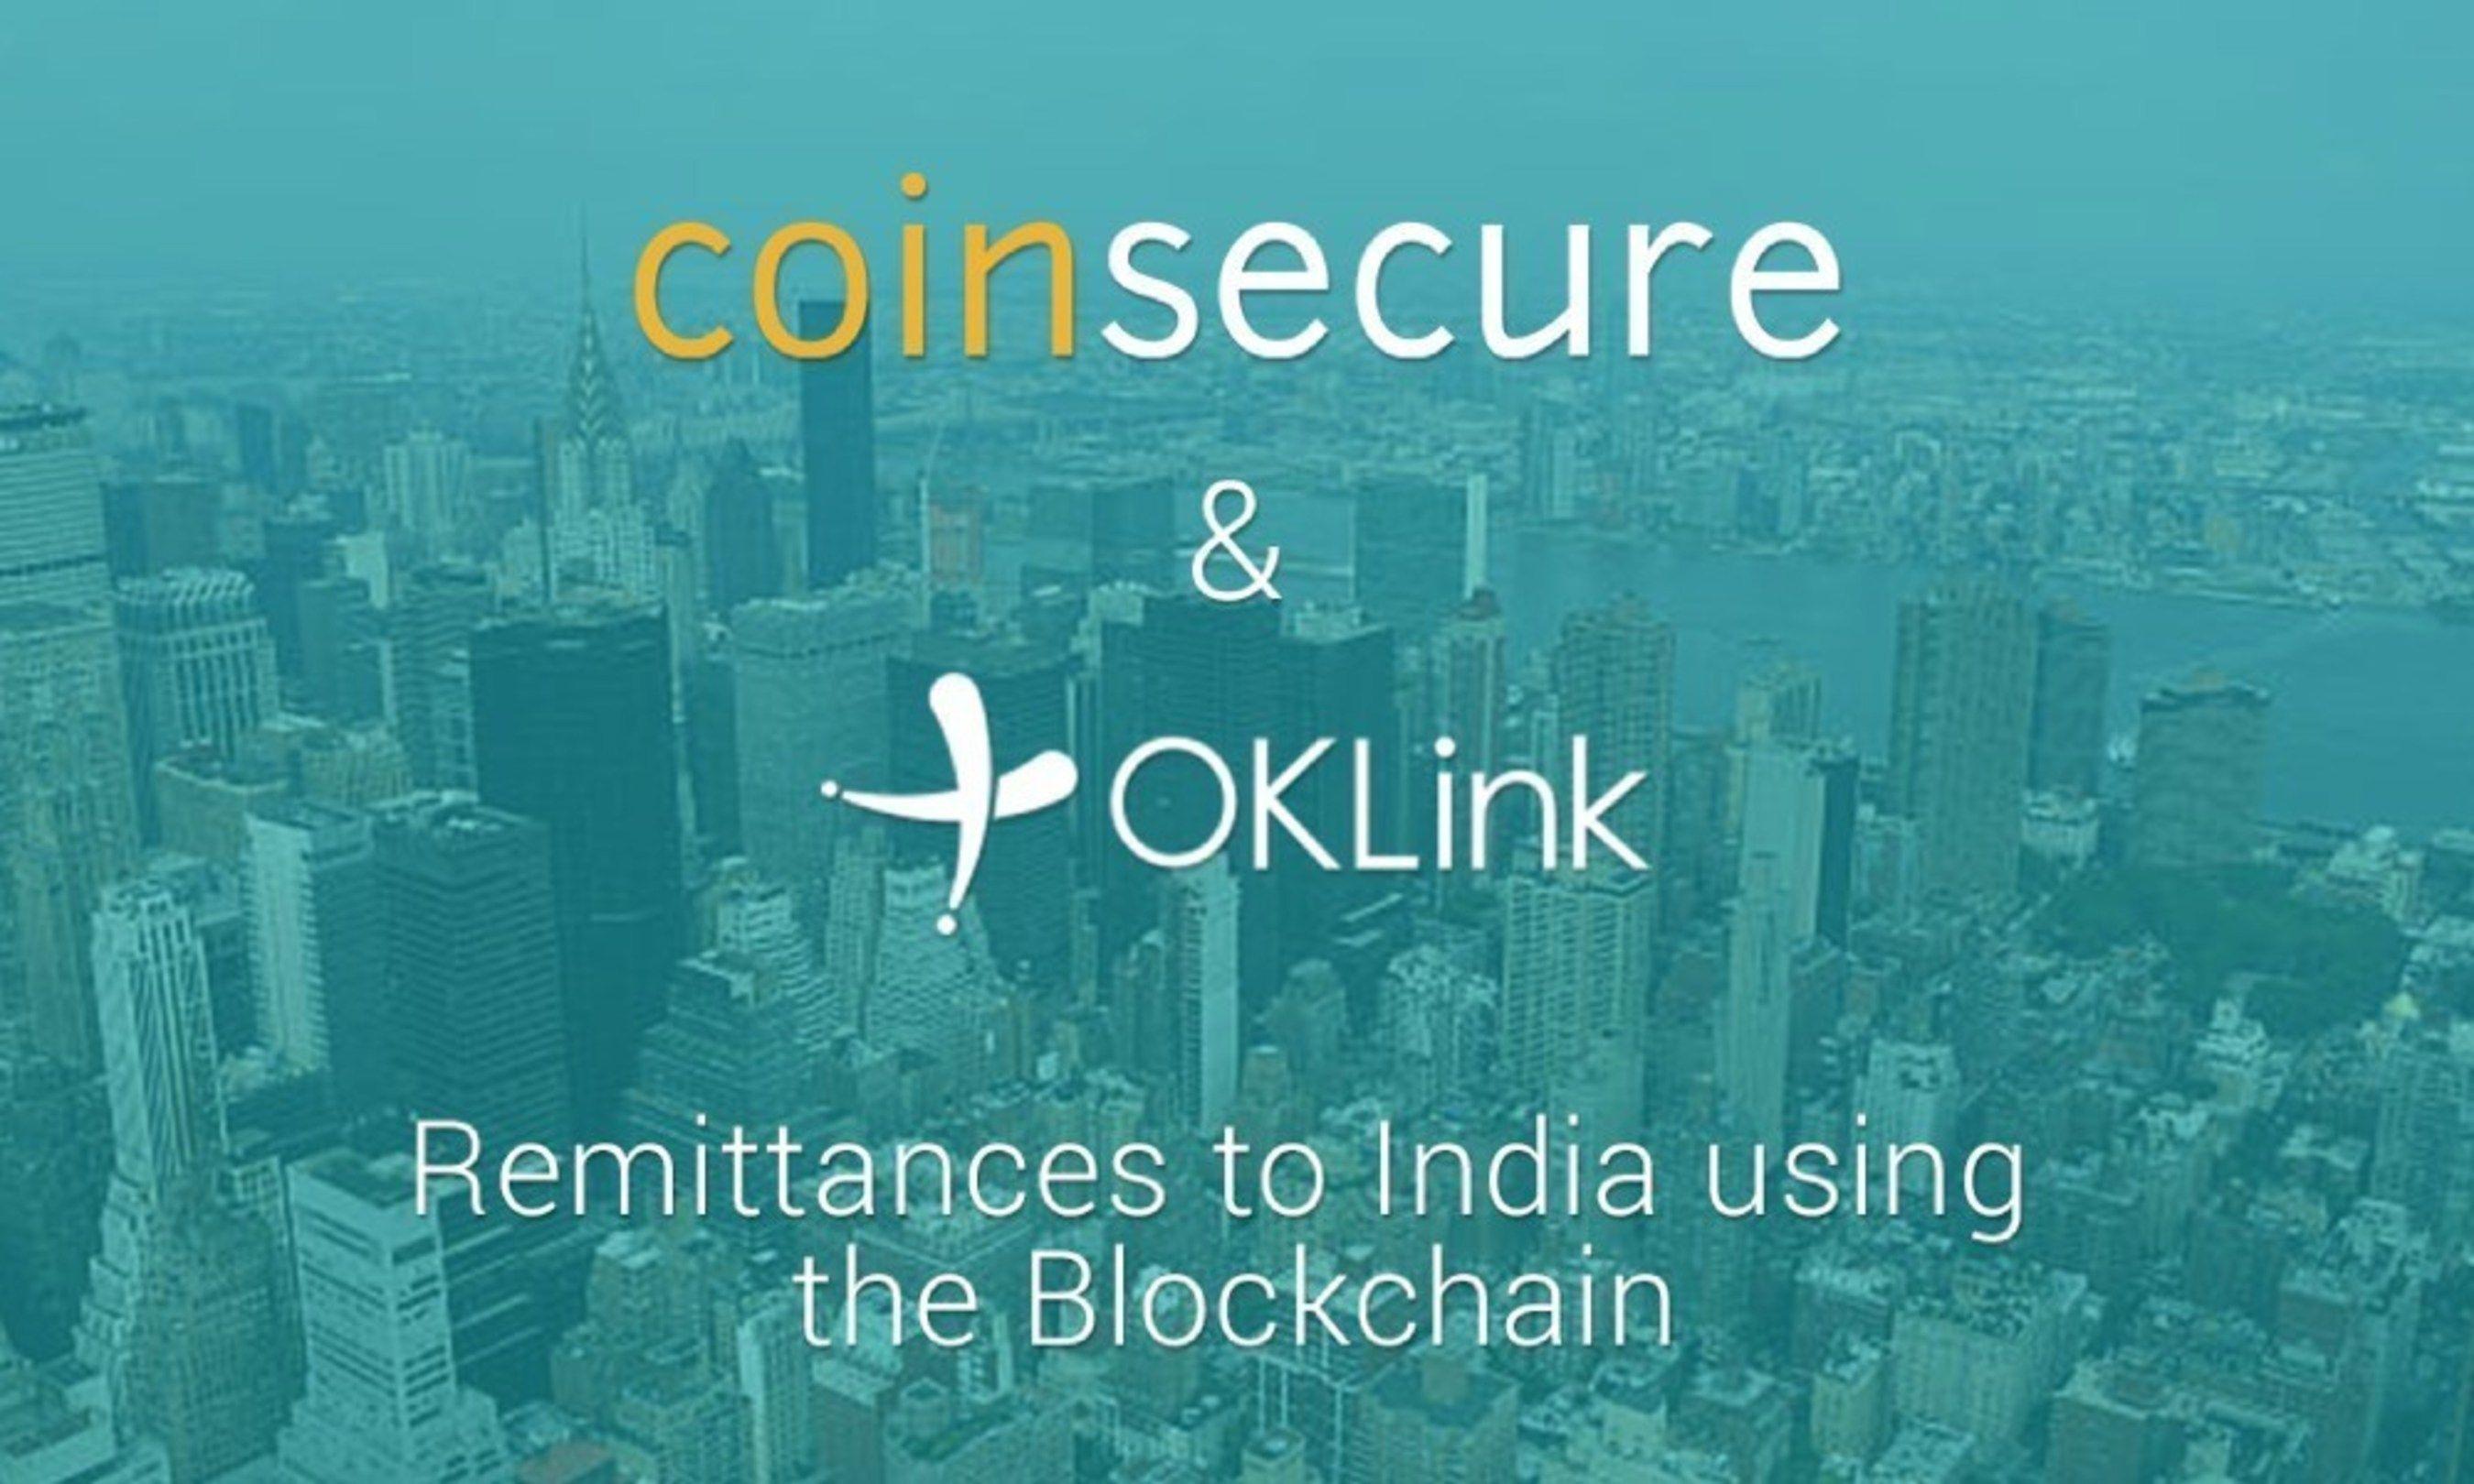 Oklink Blockchain Logo - Coinsecure Partners With OKLink to Bring Blockchain Technology Based ...